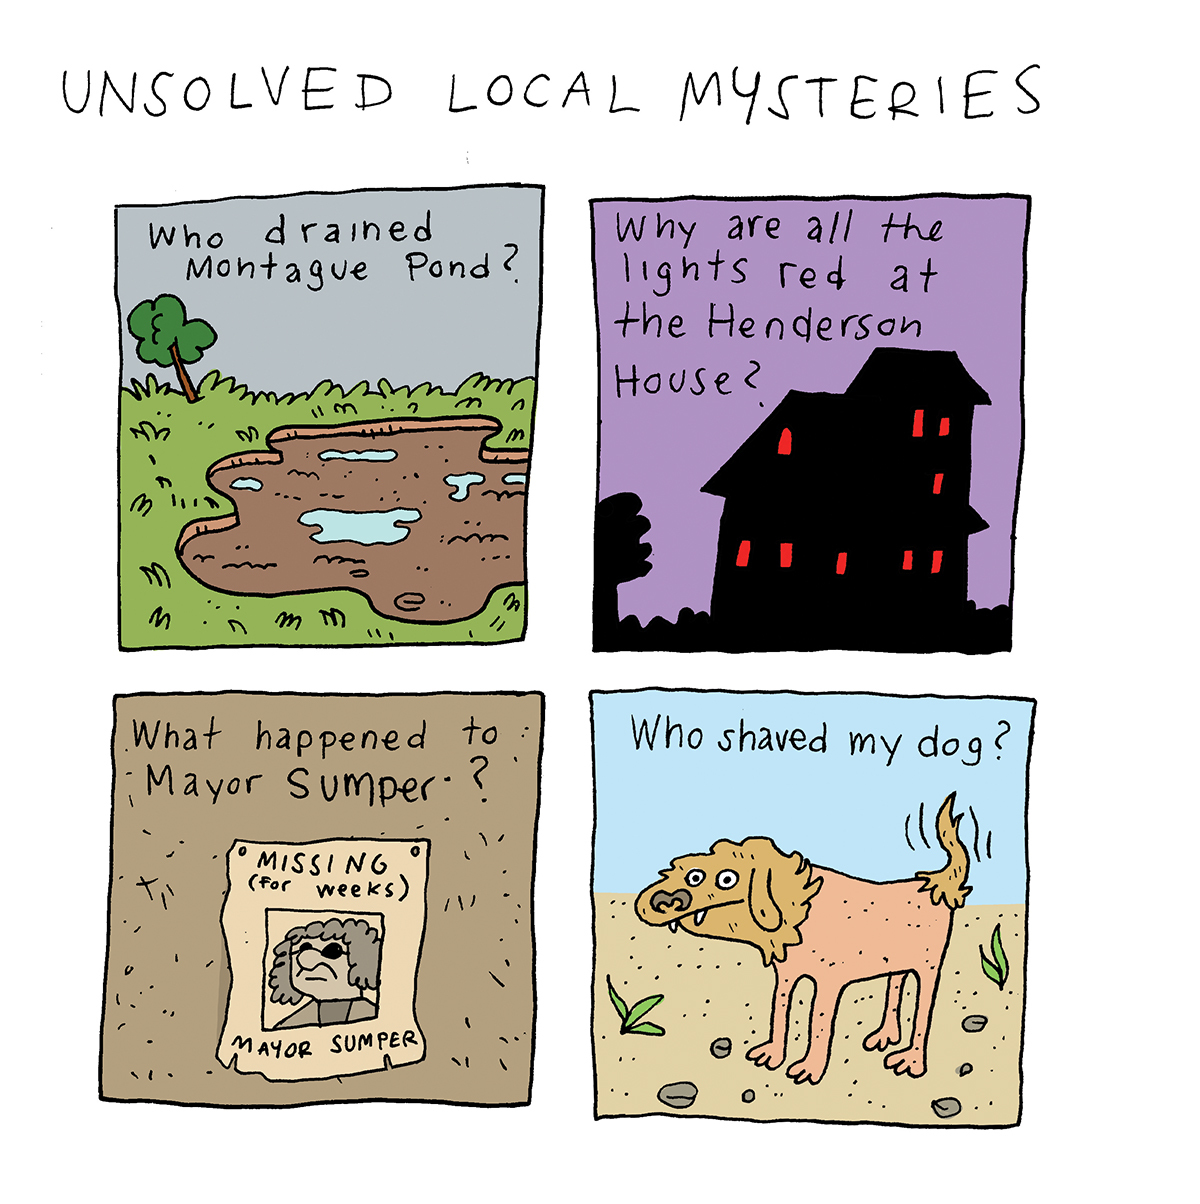 Local Mystery